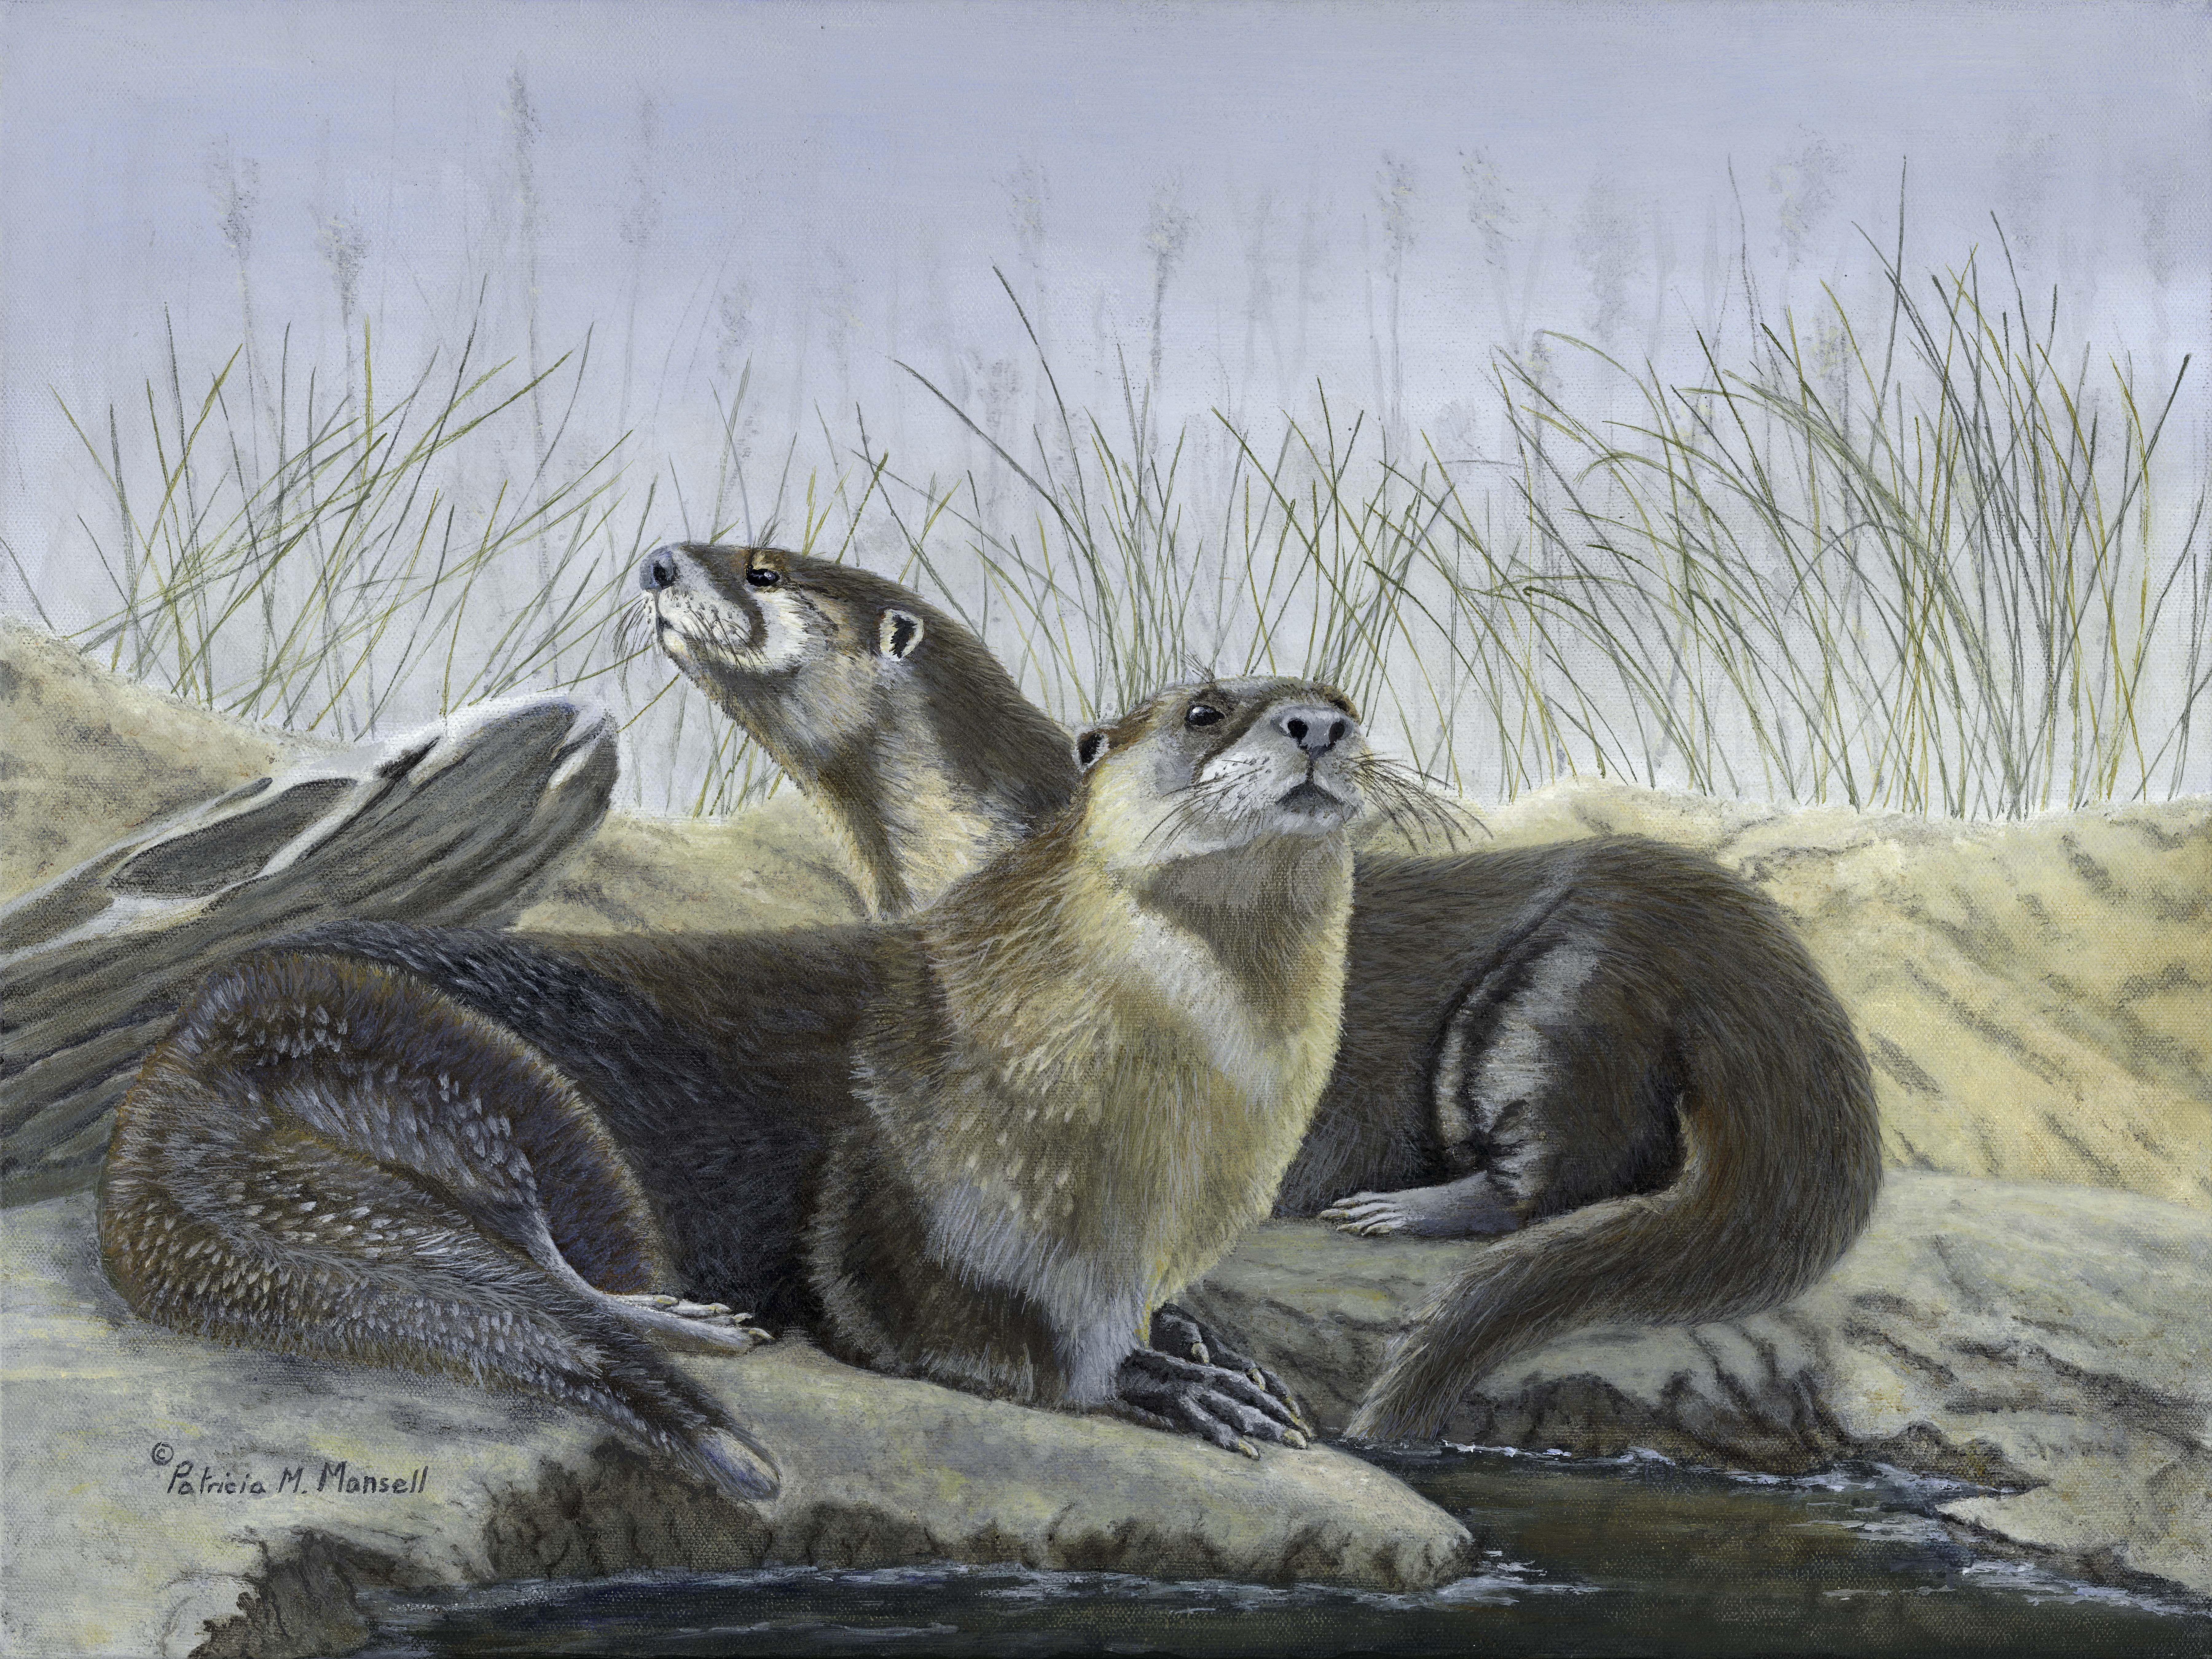 Patricia Mansell Animal Painting - River's Edge (River Otters), Painting, Acrylic on Canvas